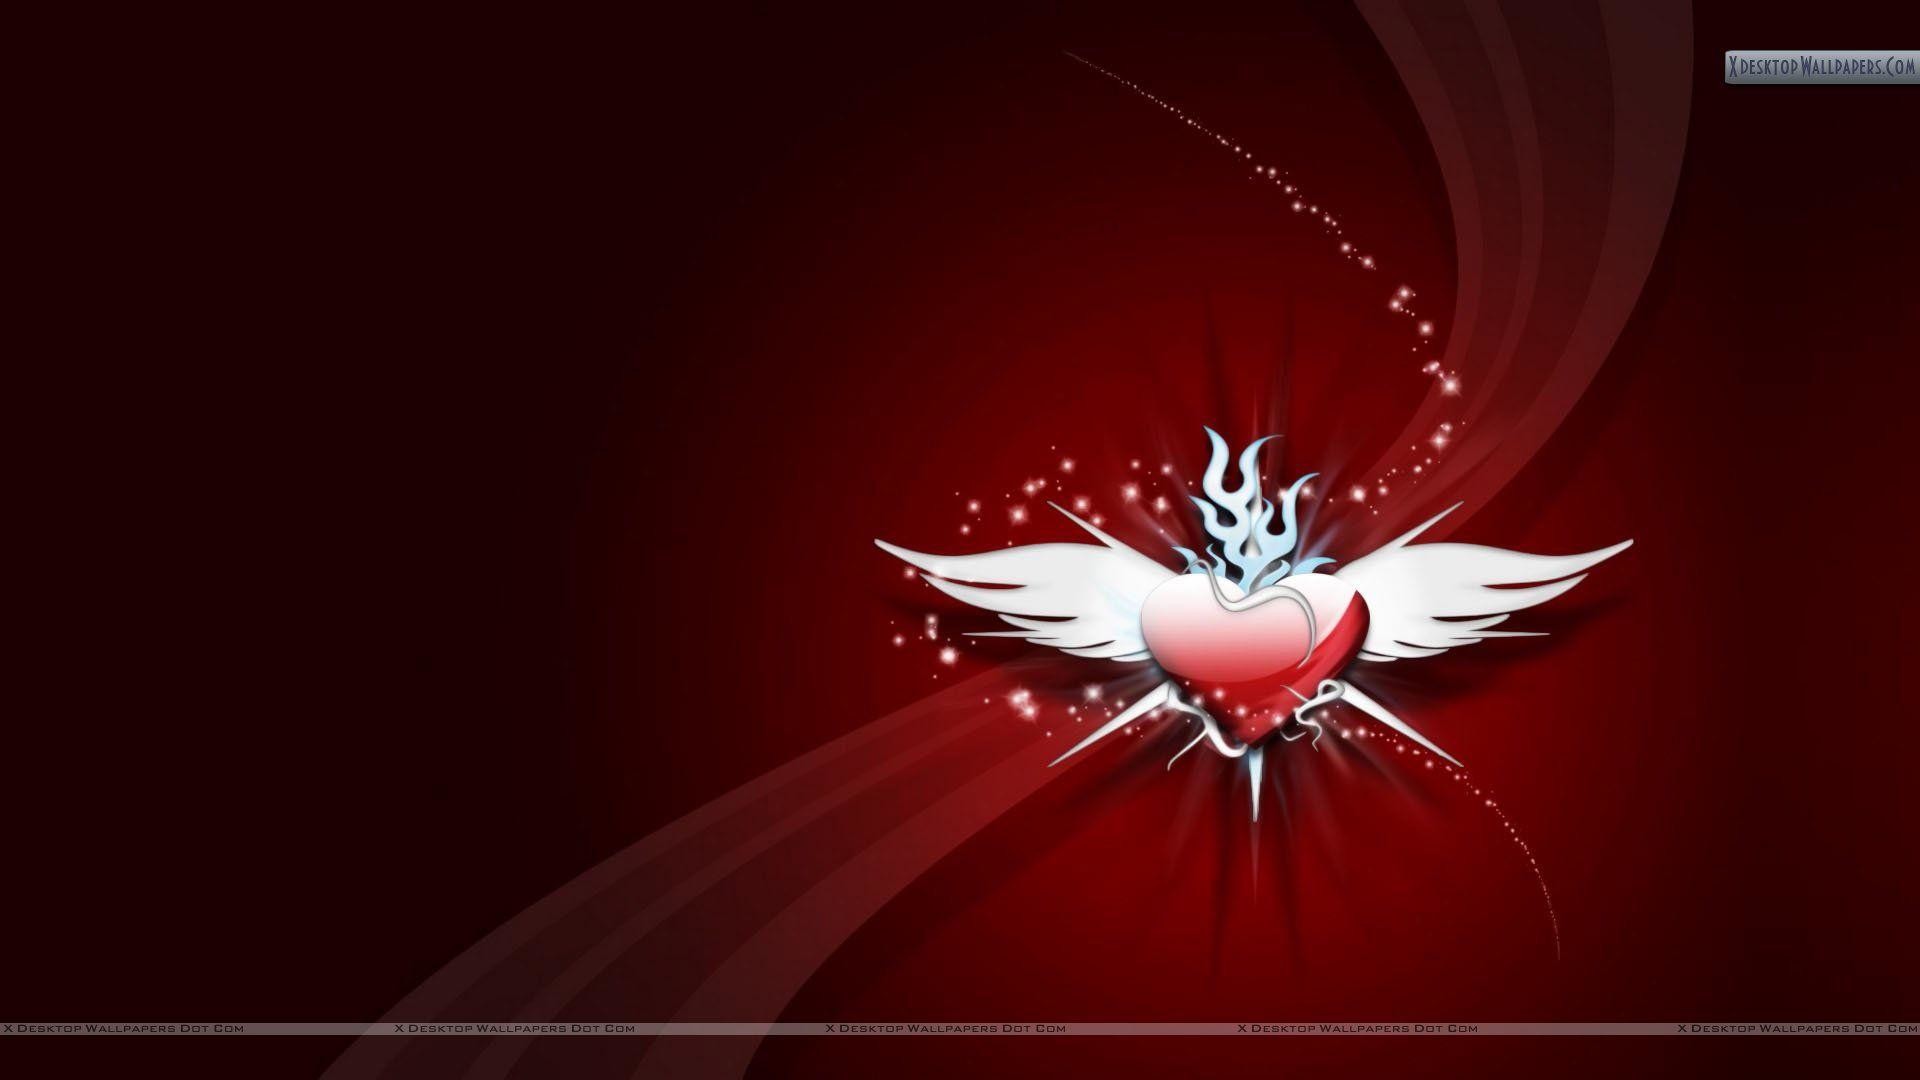 1920x1080 Cool Red Backgrounds wallpaper - 543058